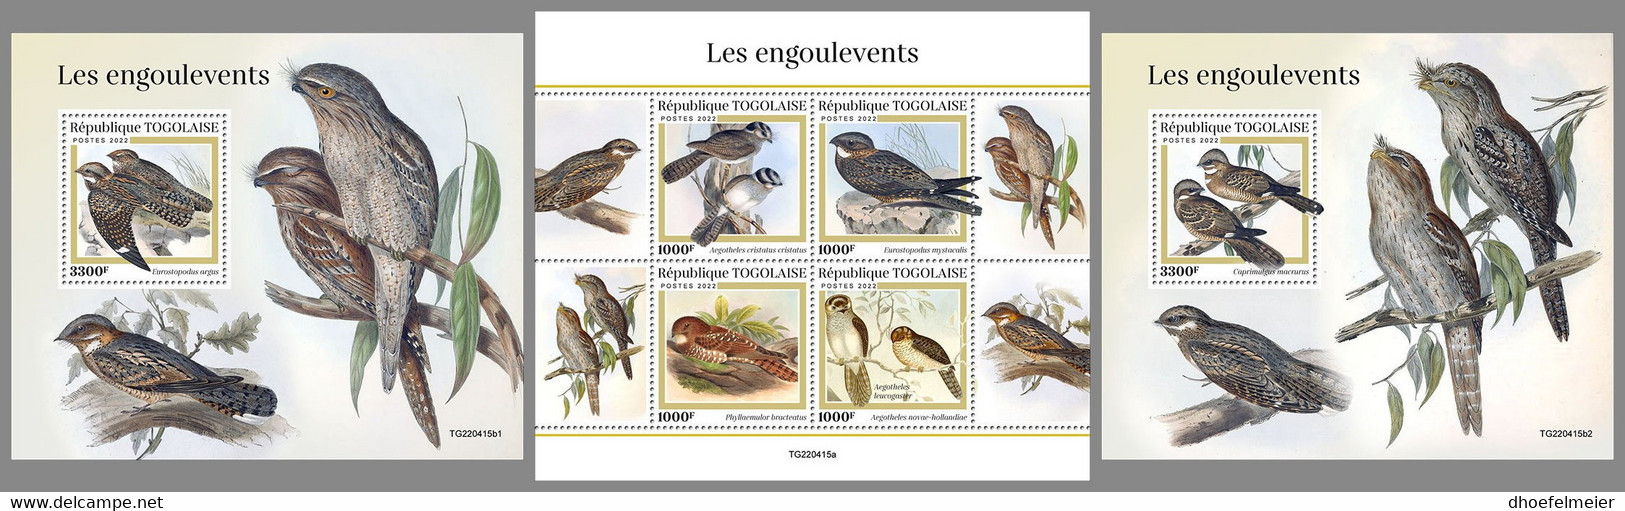 TOGO 2022 MNH Nightjars Nachtschwalben Engoulevents M/S+2S/S - OFFICIAL ISSUE - DHQ2310 - Hirondelles